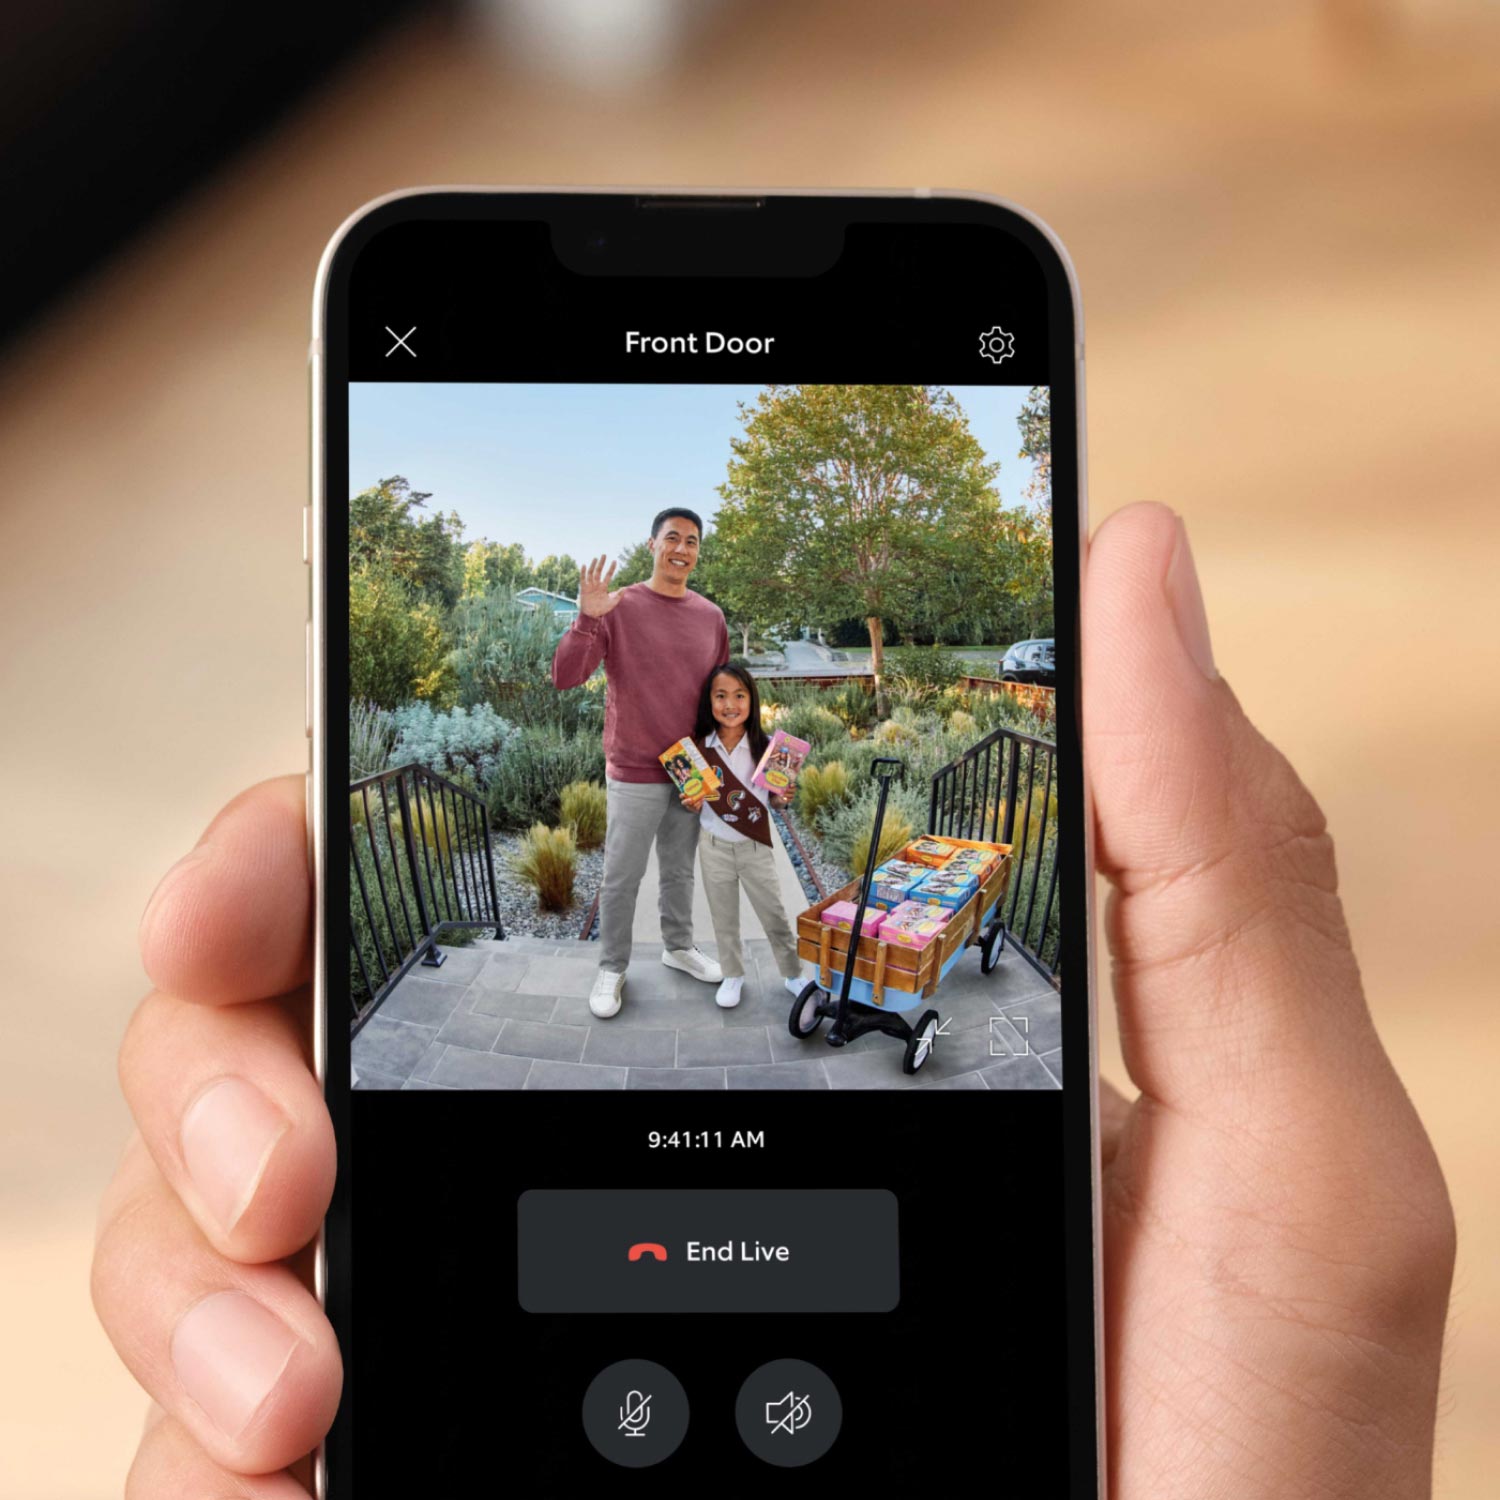 Battery Doorbell Plus (Video Doorbell) (for Certified Refurbished) - Close-up of a hand holding a smartphone. The screen shows video of a smiling man and a girl at the front door with a wagon full of items.